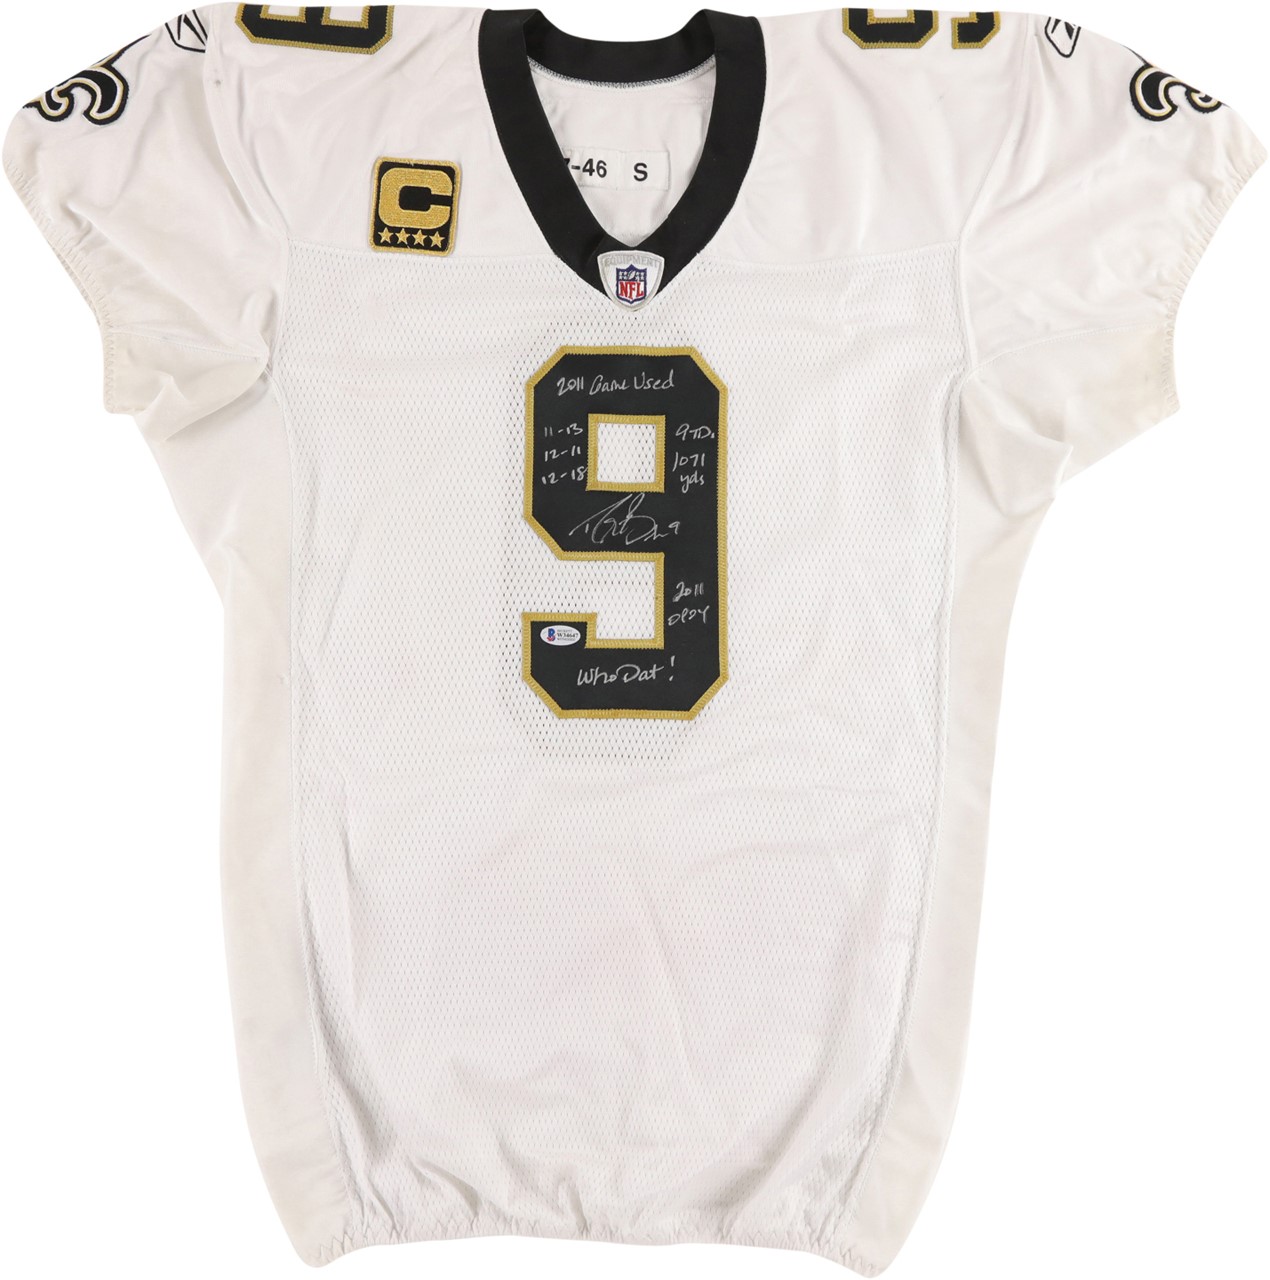 - Historic 2011 Drew Brees Photo-Matched "MVP" New Orleans Saints Game Worn and Heavily Inscribed Jersey - Worn in Two NFL Record-Breaking Games (Resolution Photomatching LOA & Saints LOA)